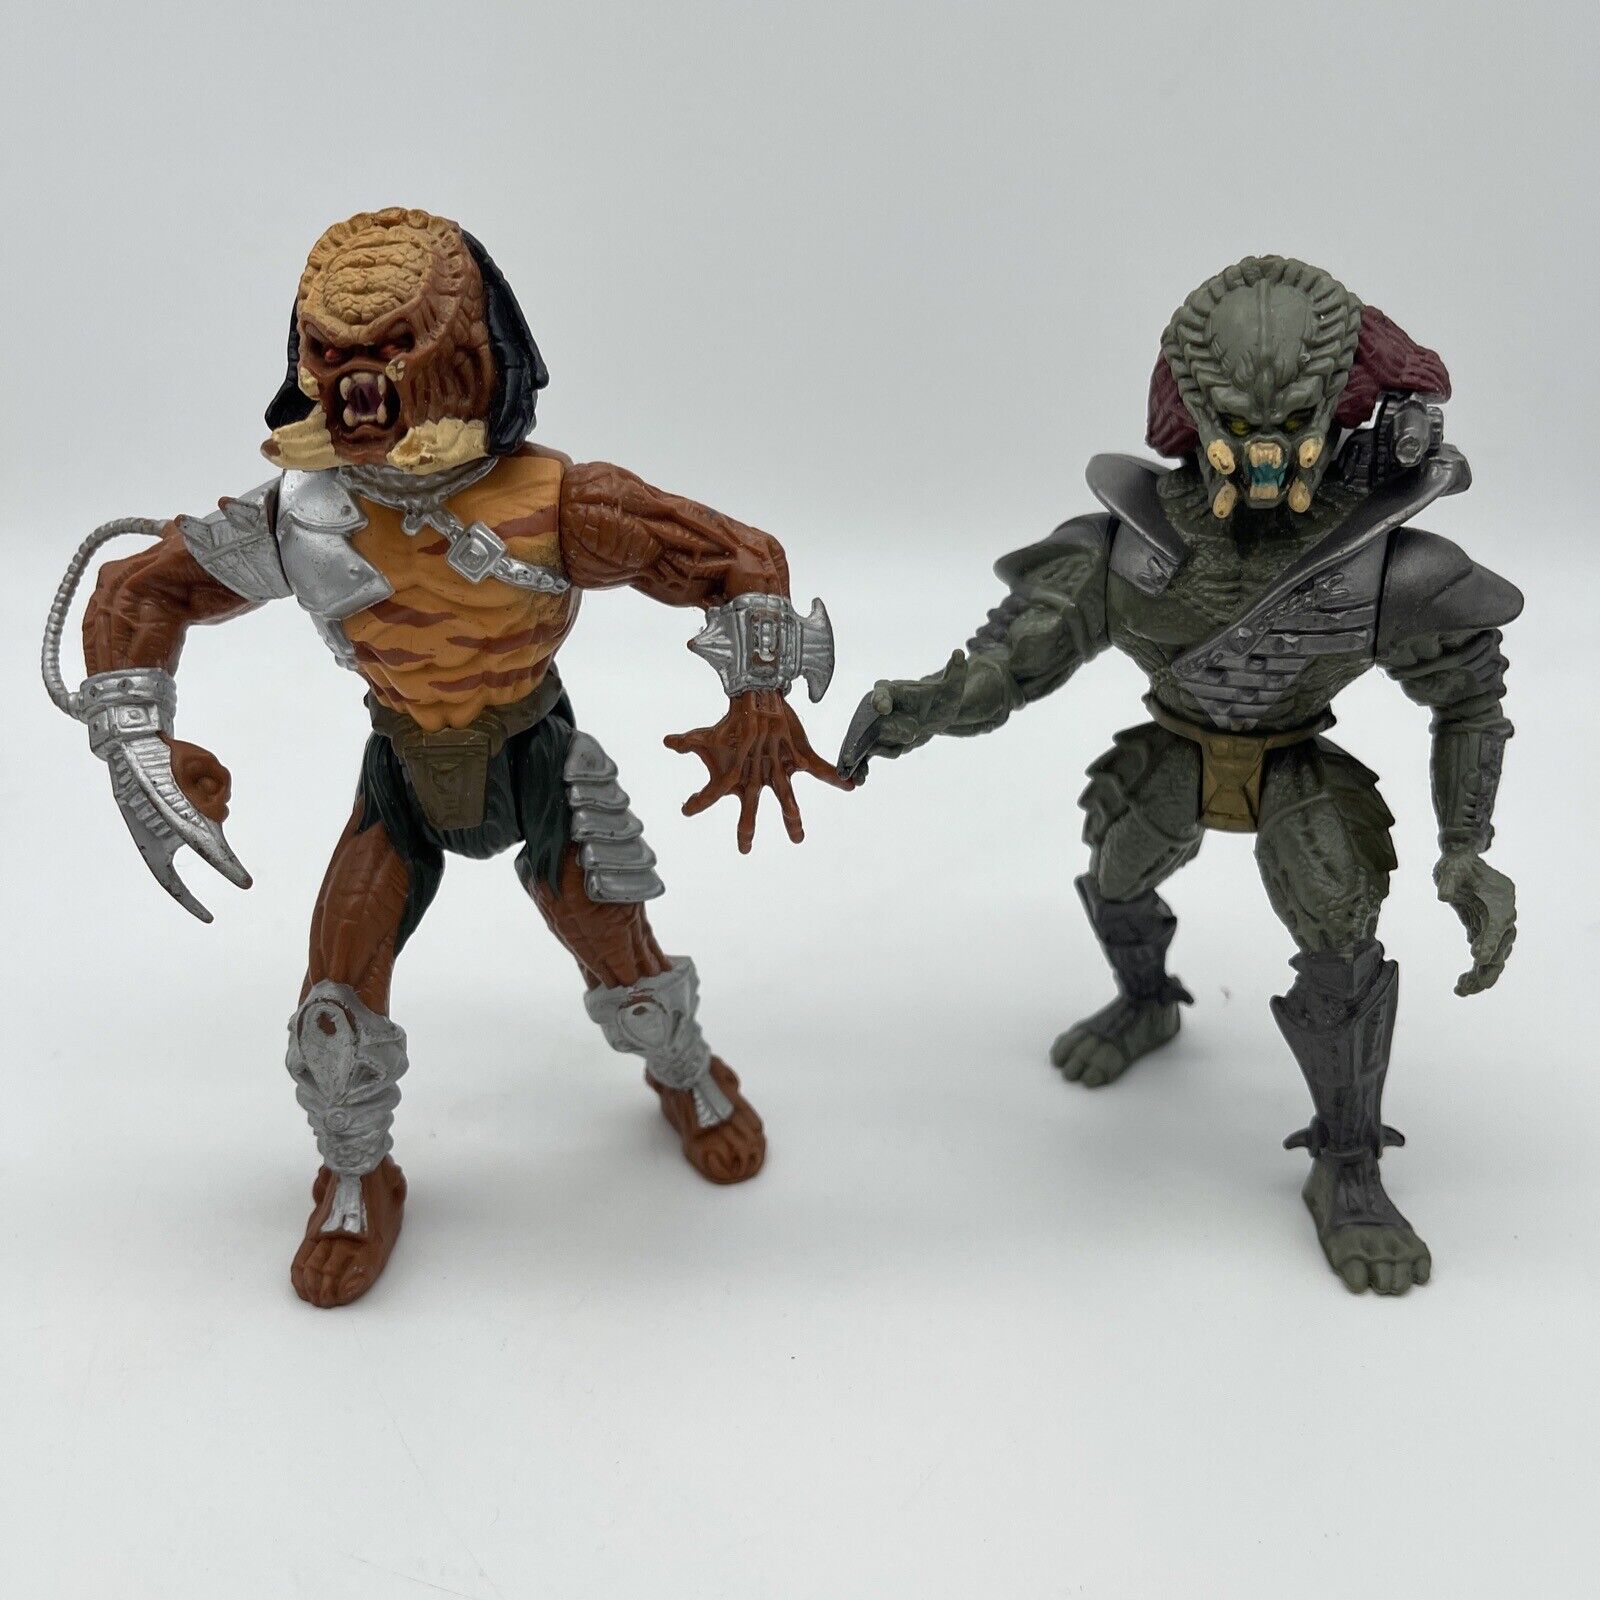 Predator 6" Action Figures Kenner 1993 Lot of 2 "Scavage & Cracked Tusk"